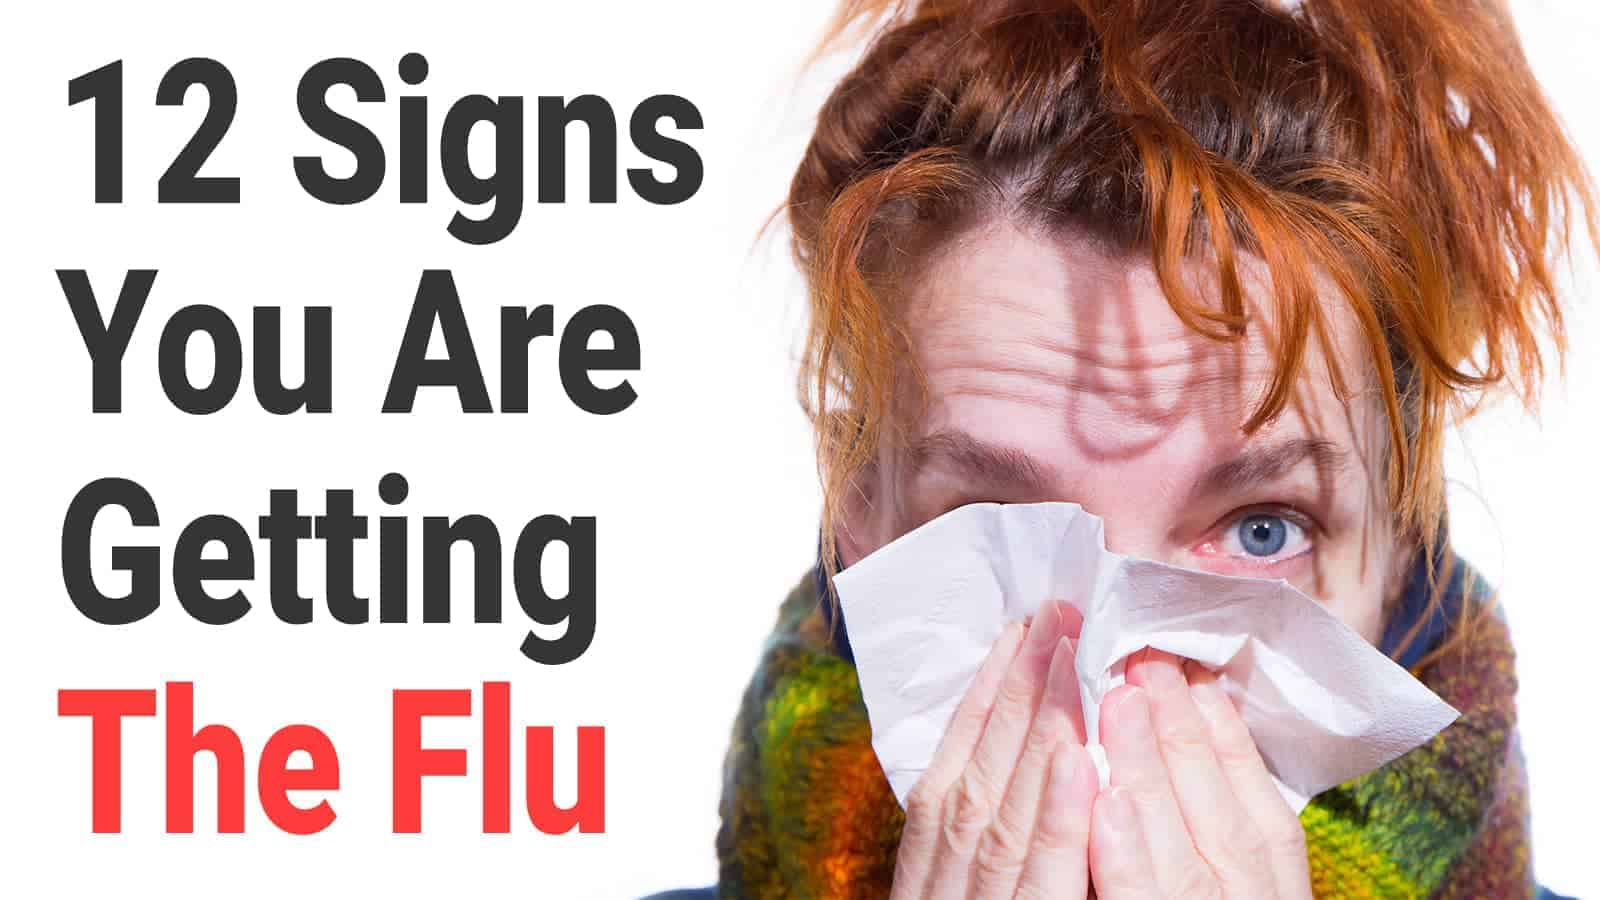 12 Signs You Are Getting The Flu